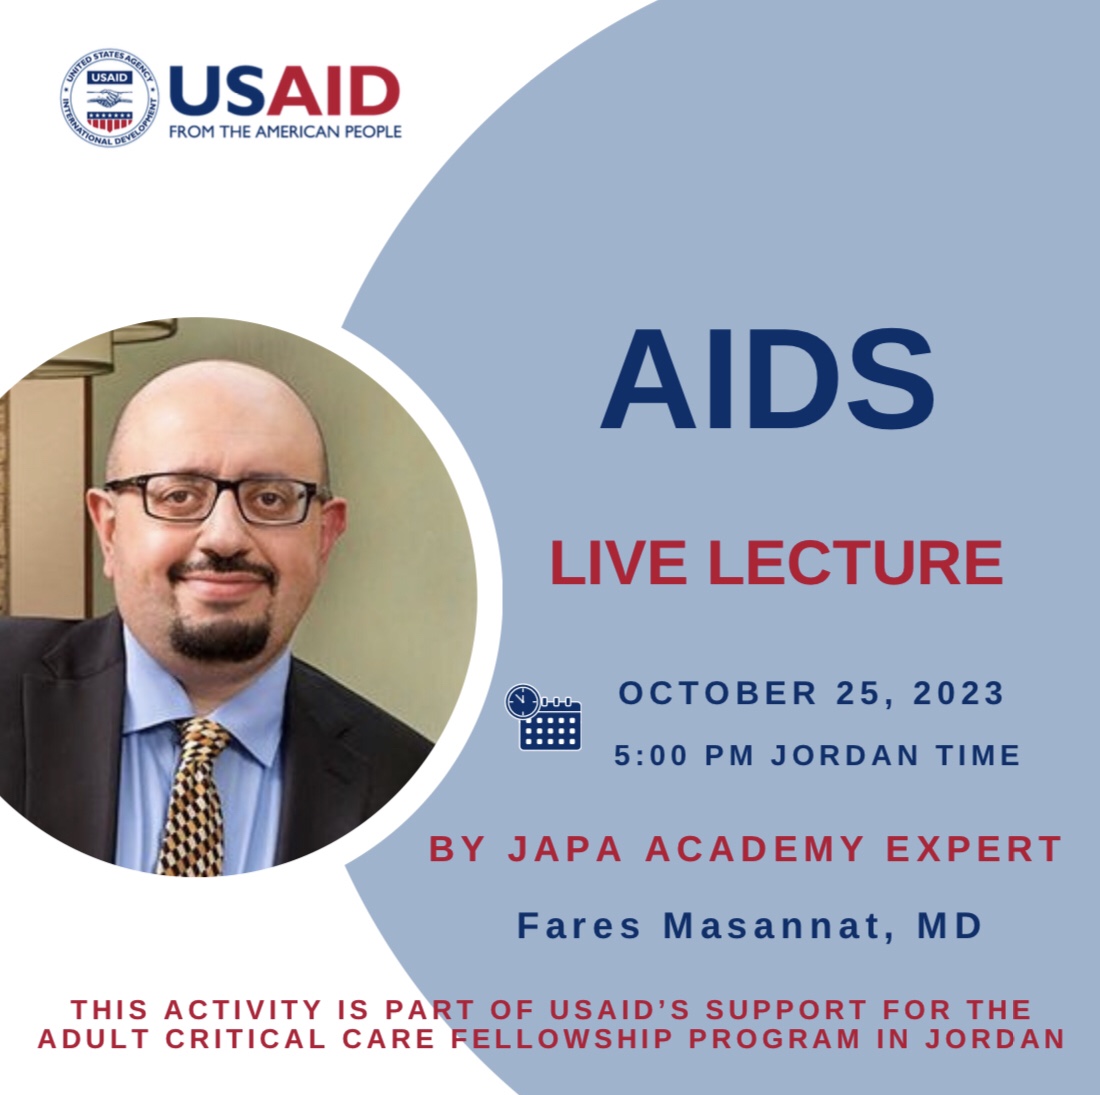 “AIDS” Live Lecture